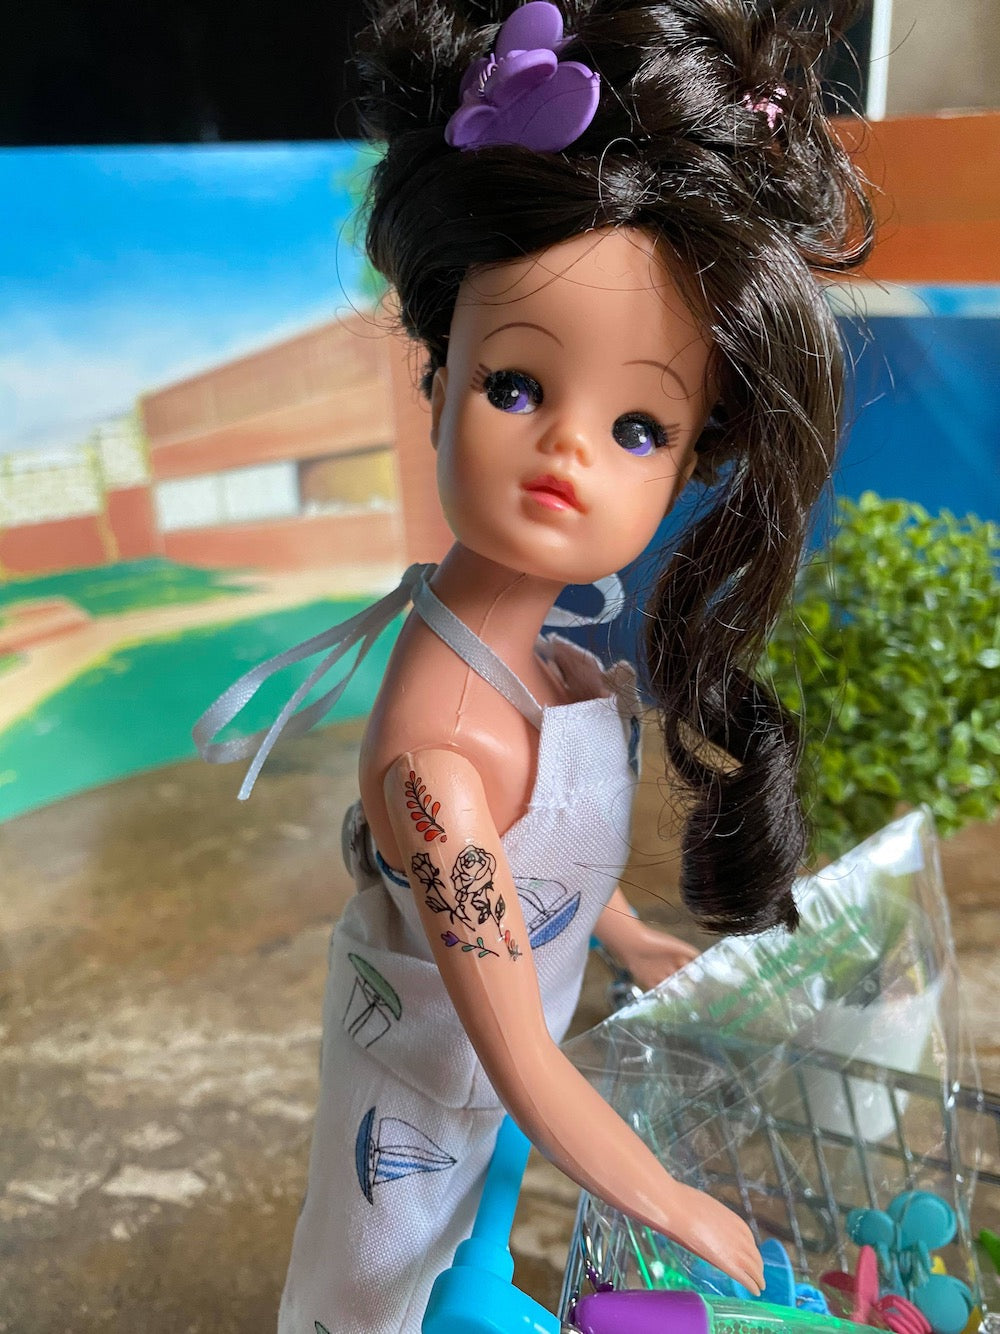 Sindy doll with tattoos by Lucy Aissa